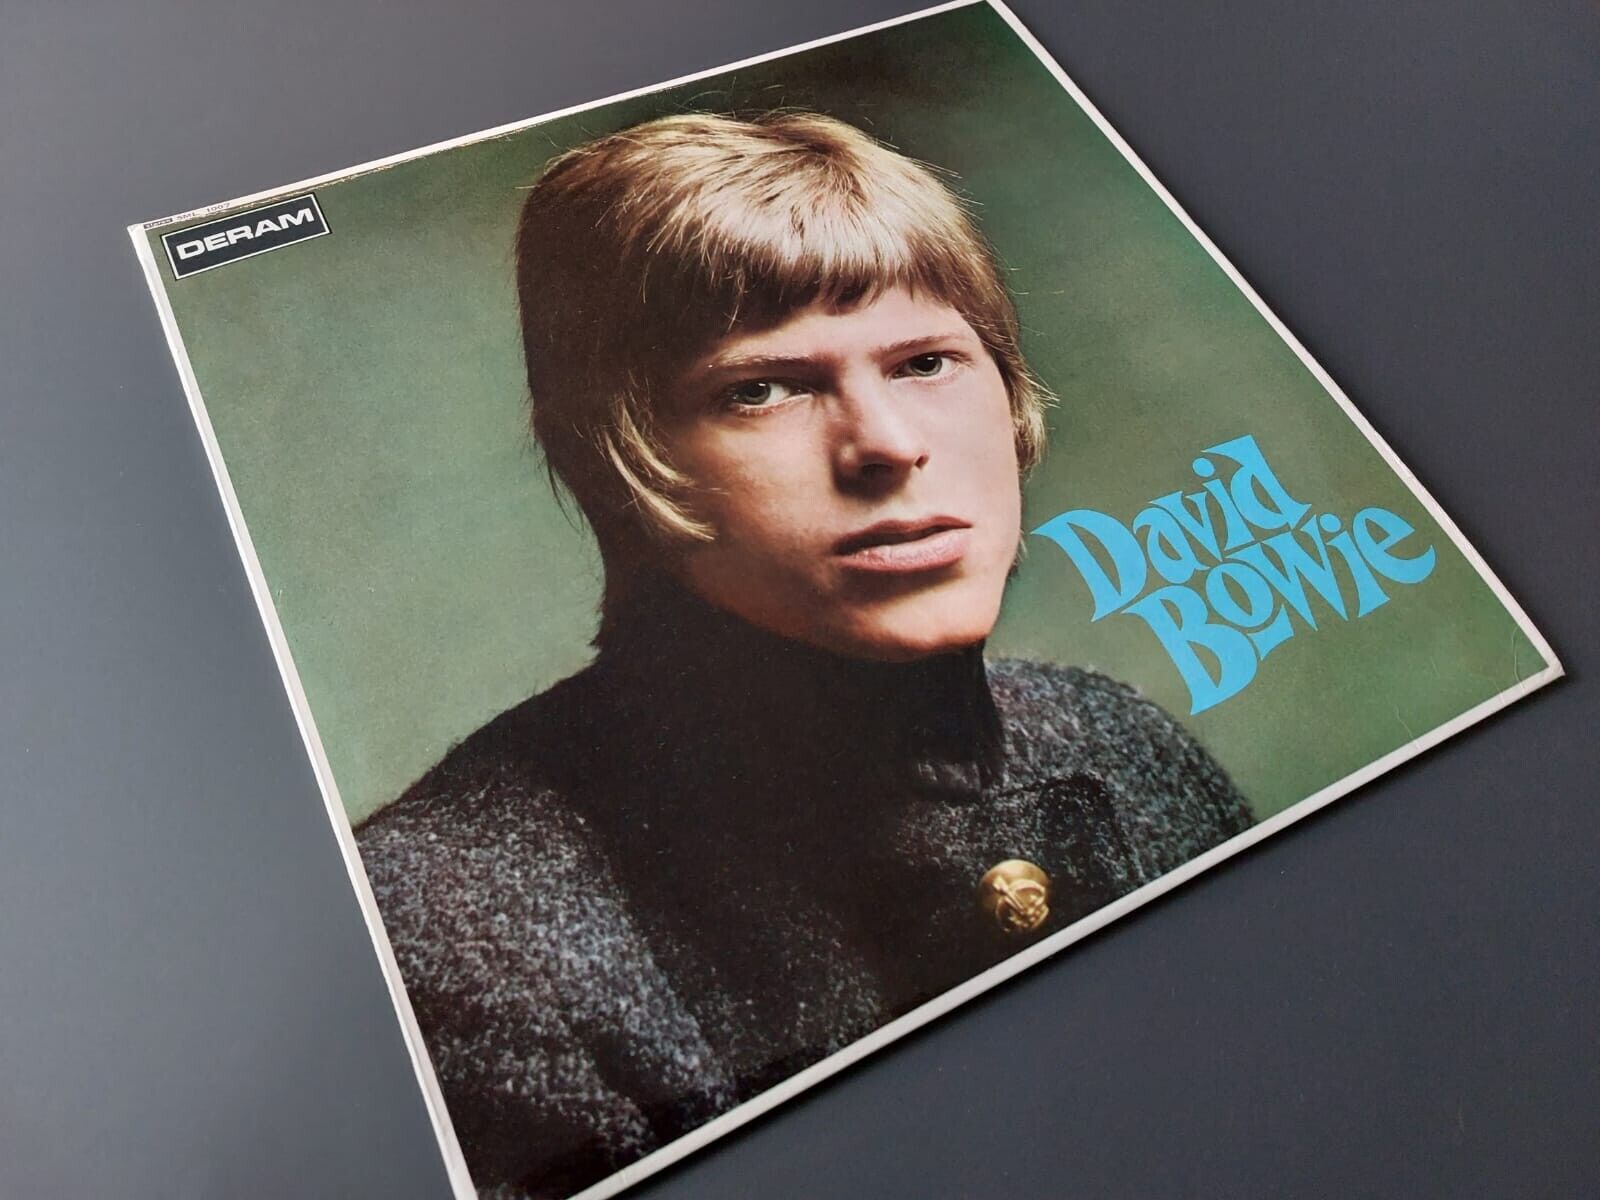 Pic 1 David Bowie LP Same UK Deram Stereo 1st Press CLEANEST COPY EVER BEEN SOLD PSYCH